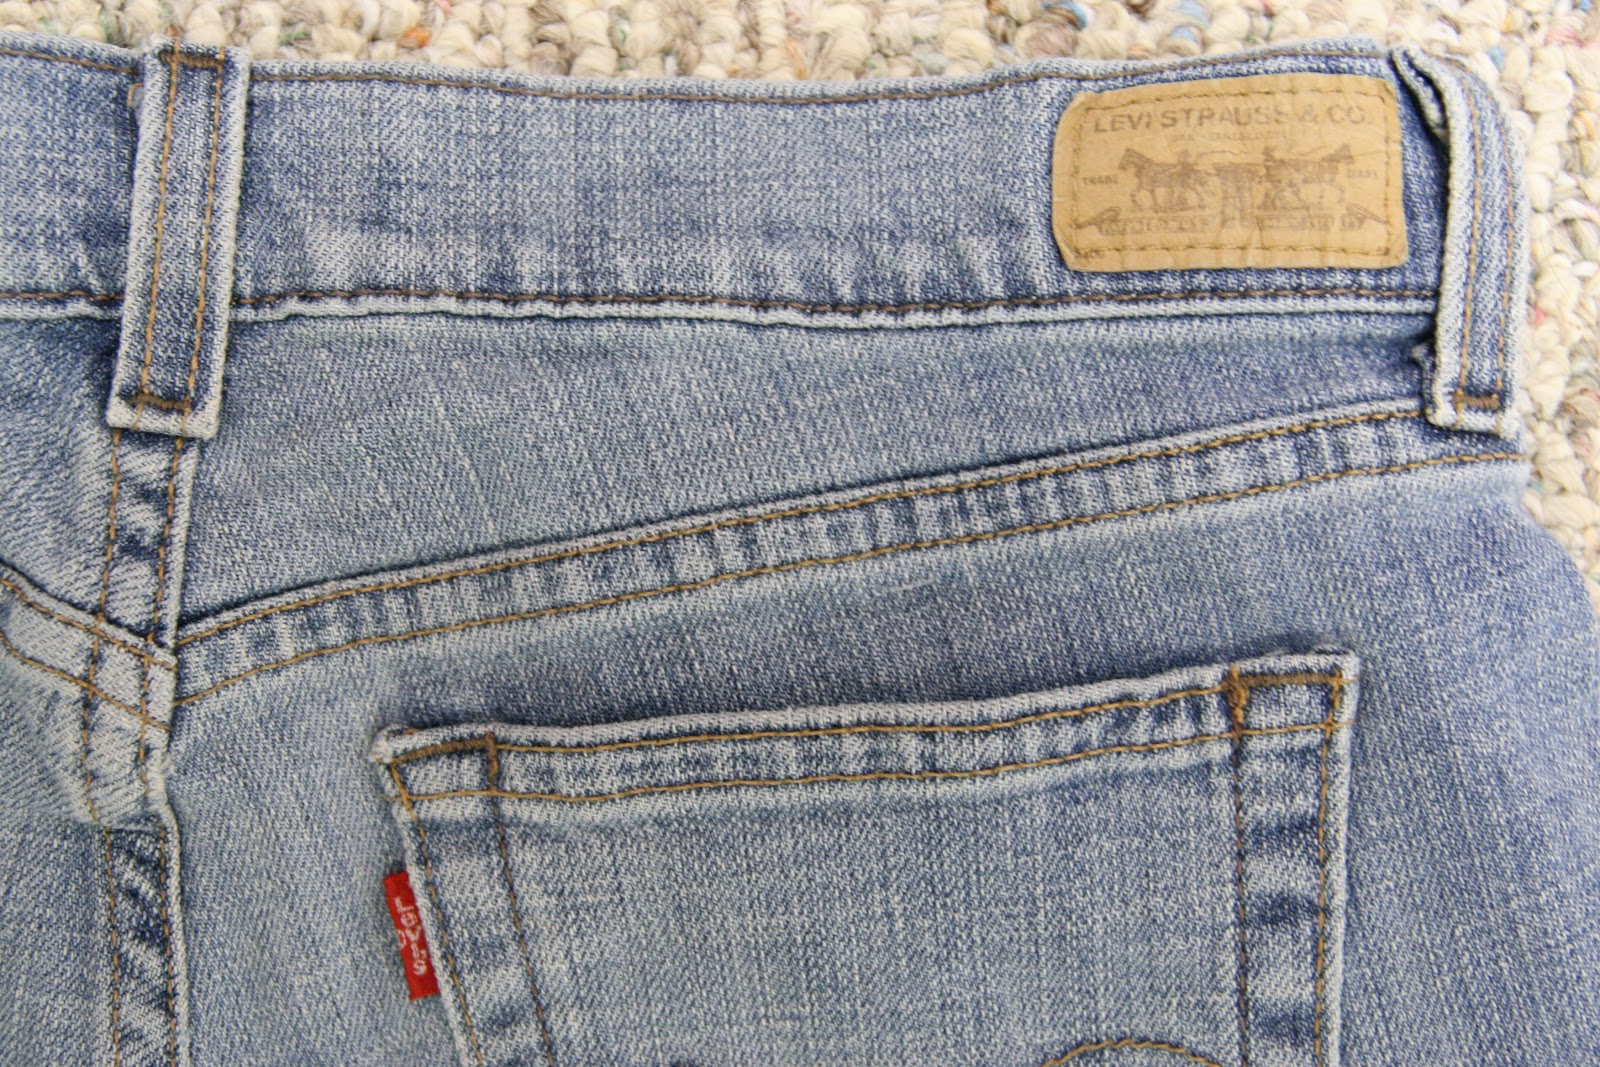 Thrift and Shout: How to Make Your Own Jorts (Jean Shorts)